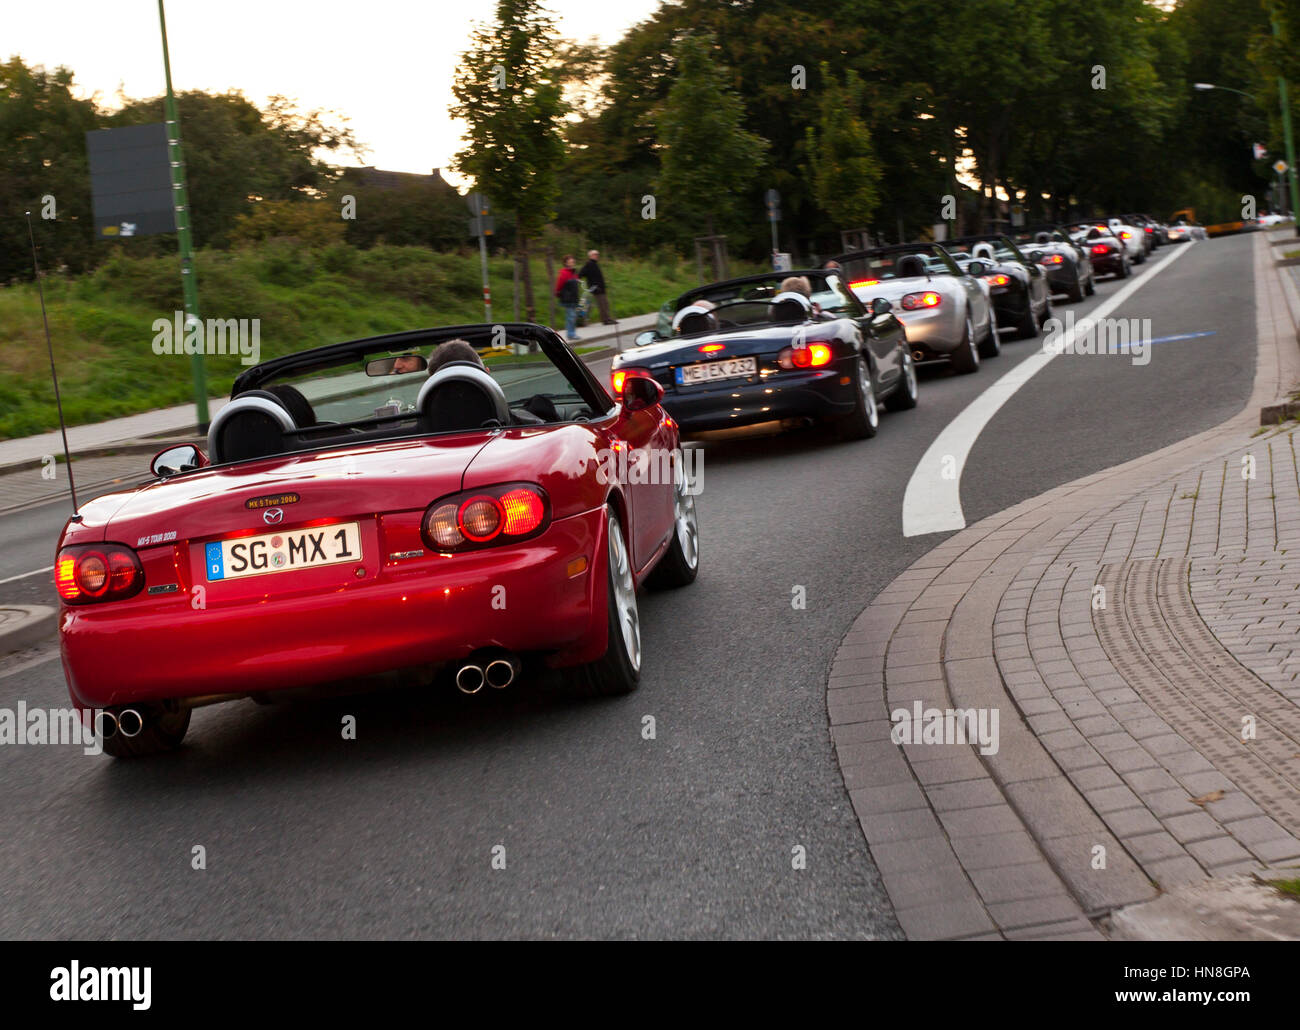 Essen, Germany - September 18, 2010: More than 400 cars gain a new Guinness world record for the longest Mazda MX-5 Miata corso ever in celebration of Stock Photo